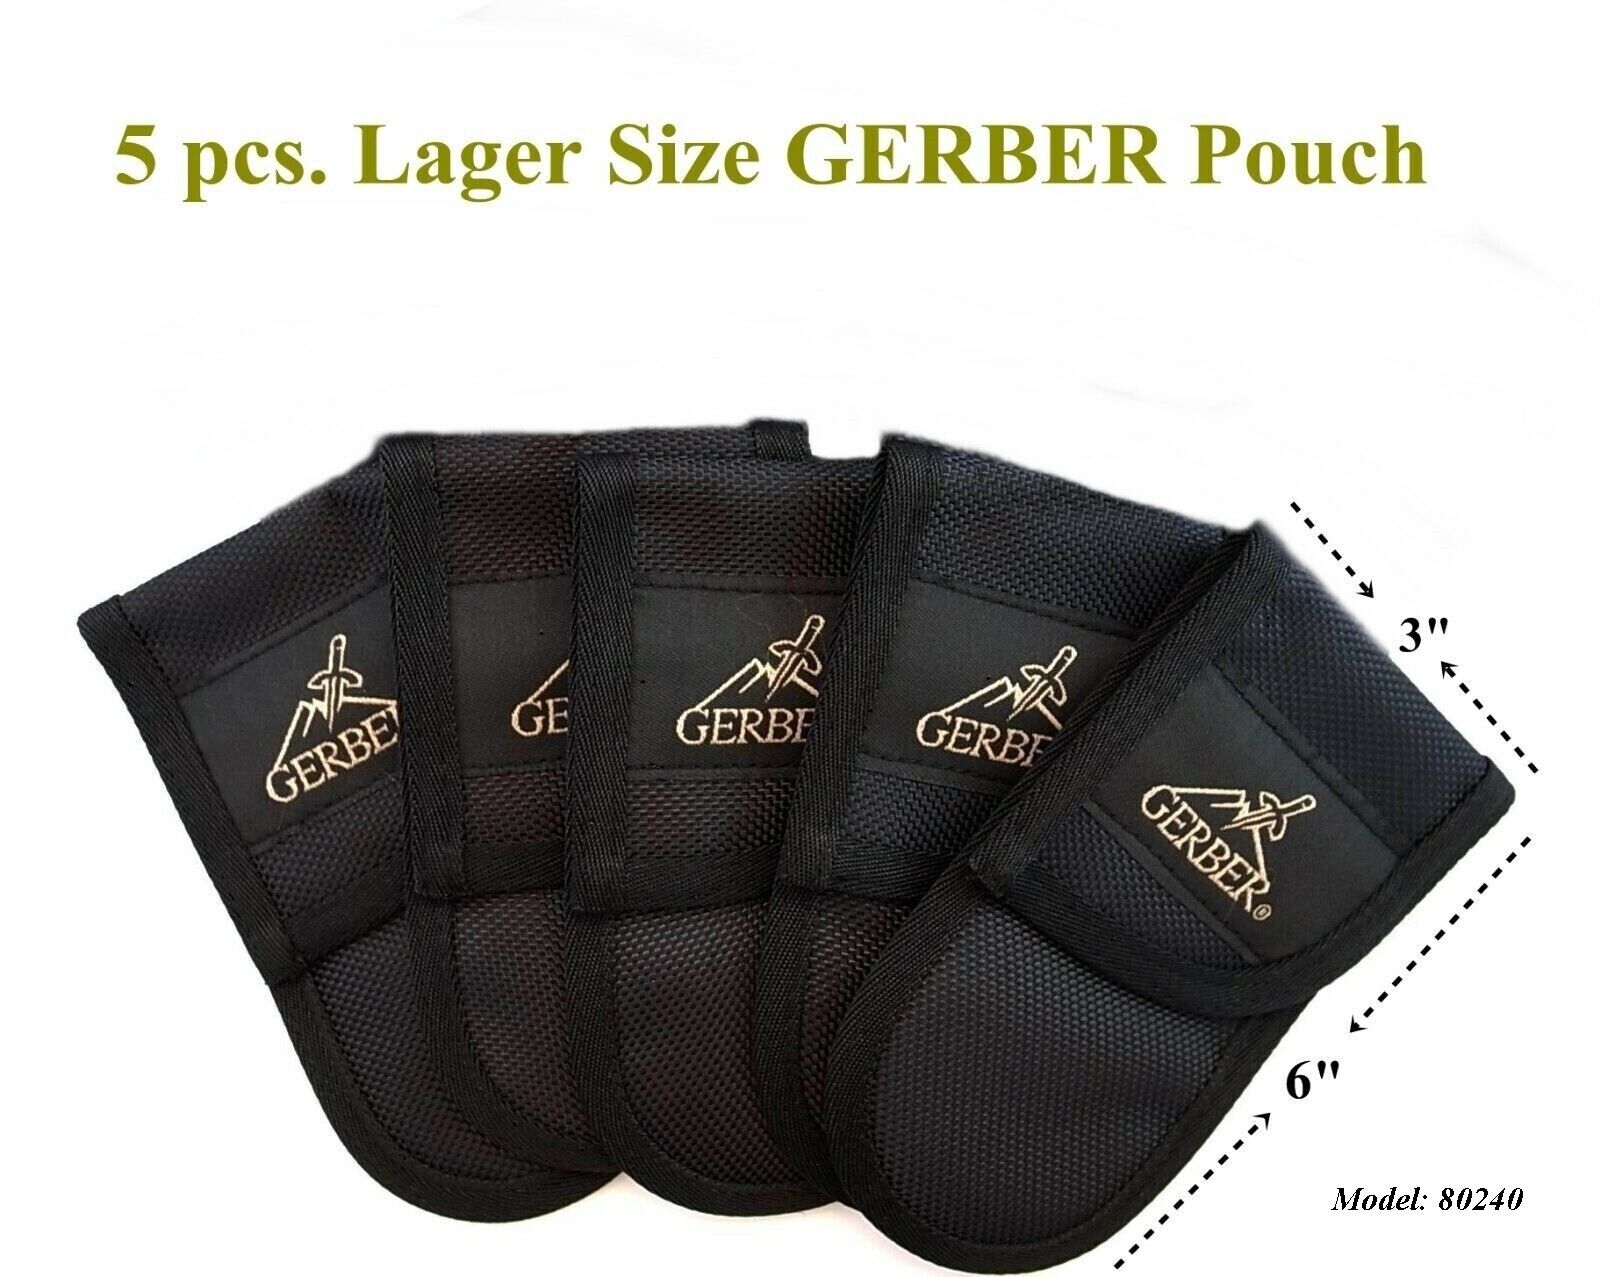 5 BRAND NEW, LARGE SIZE 15x8cm GERBER MULTI TOOL / KNIFE POUCH / KNIVES SHEATH